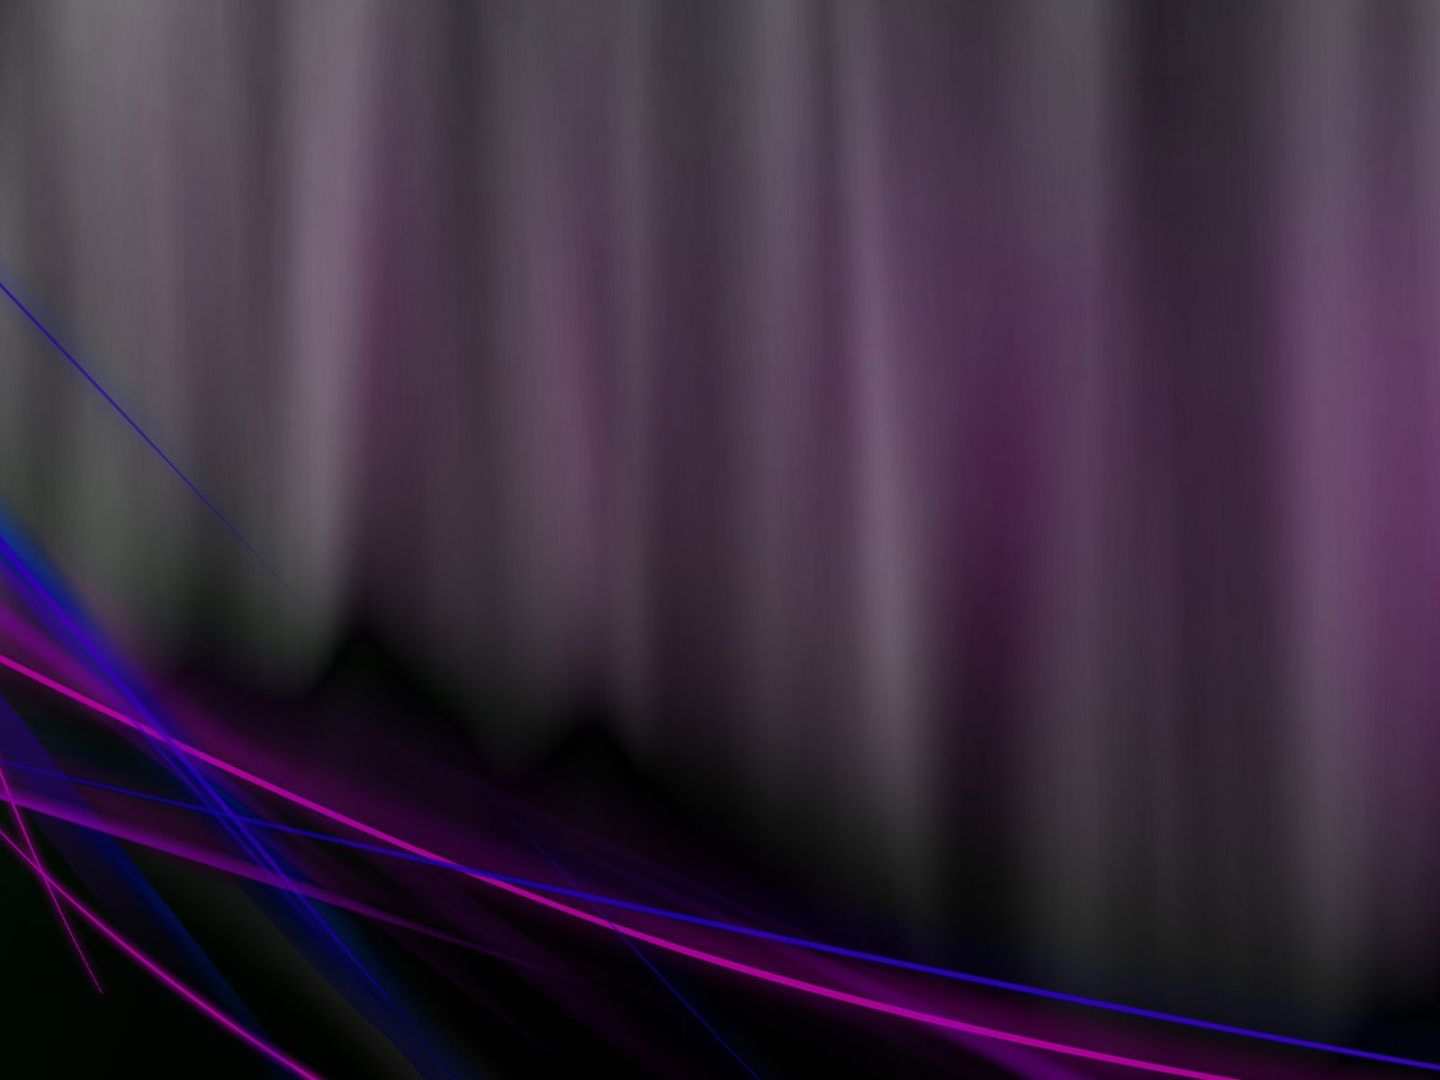 Purple And Blue Lines Wallpaper In 1440x1080 Resolution